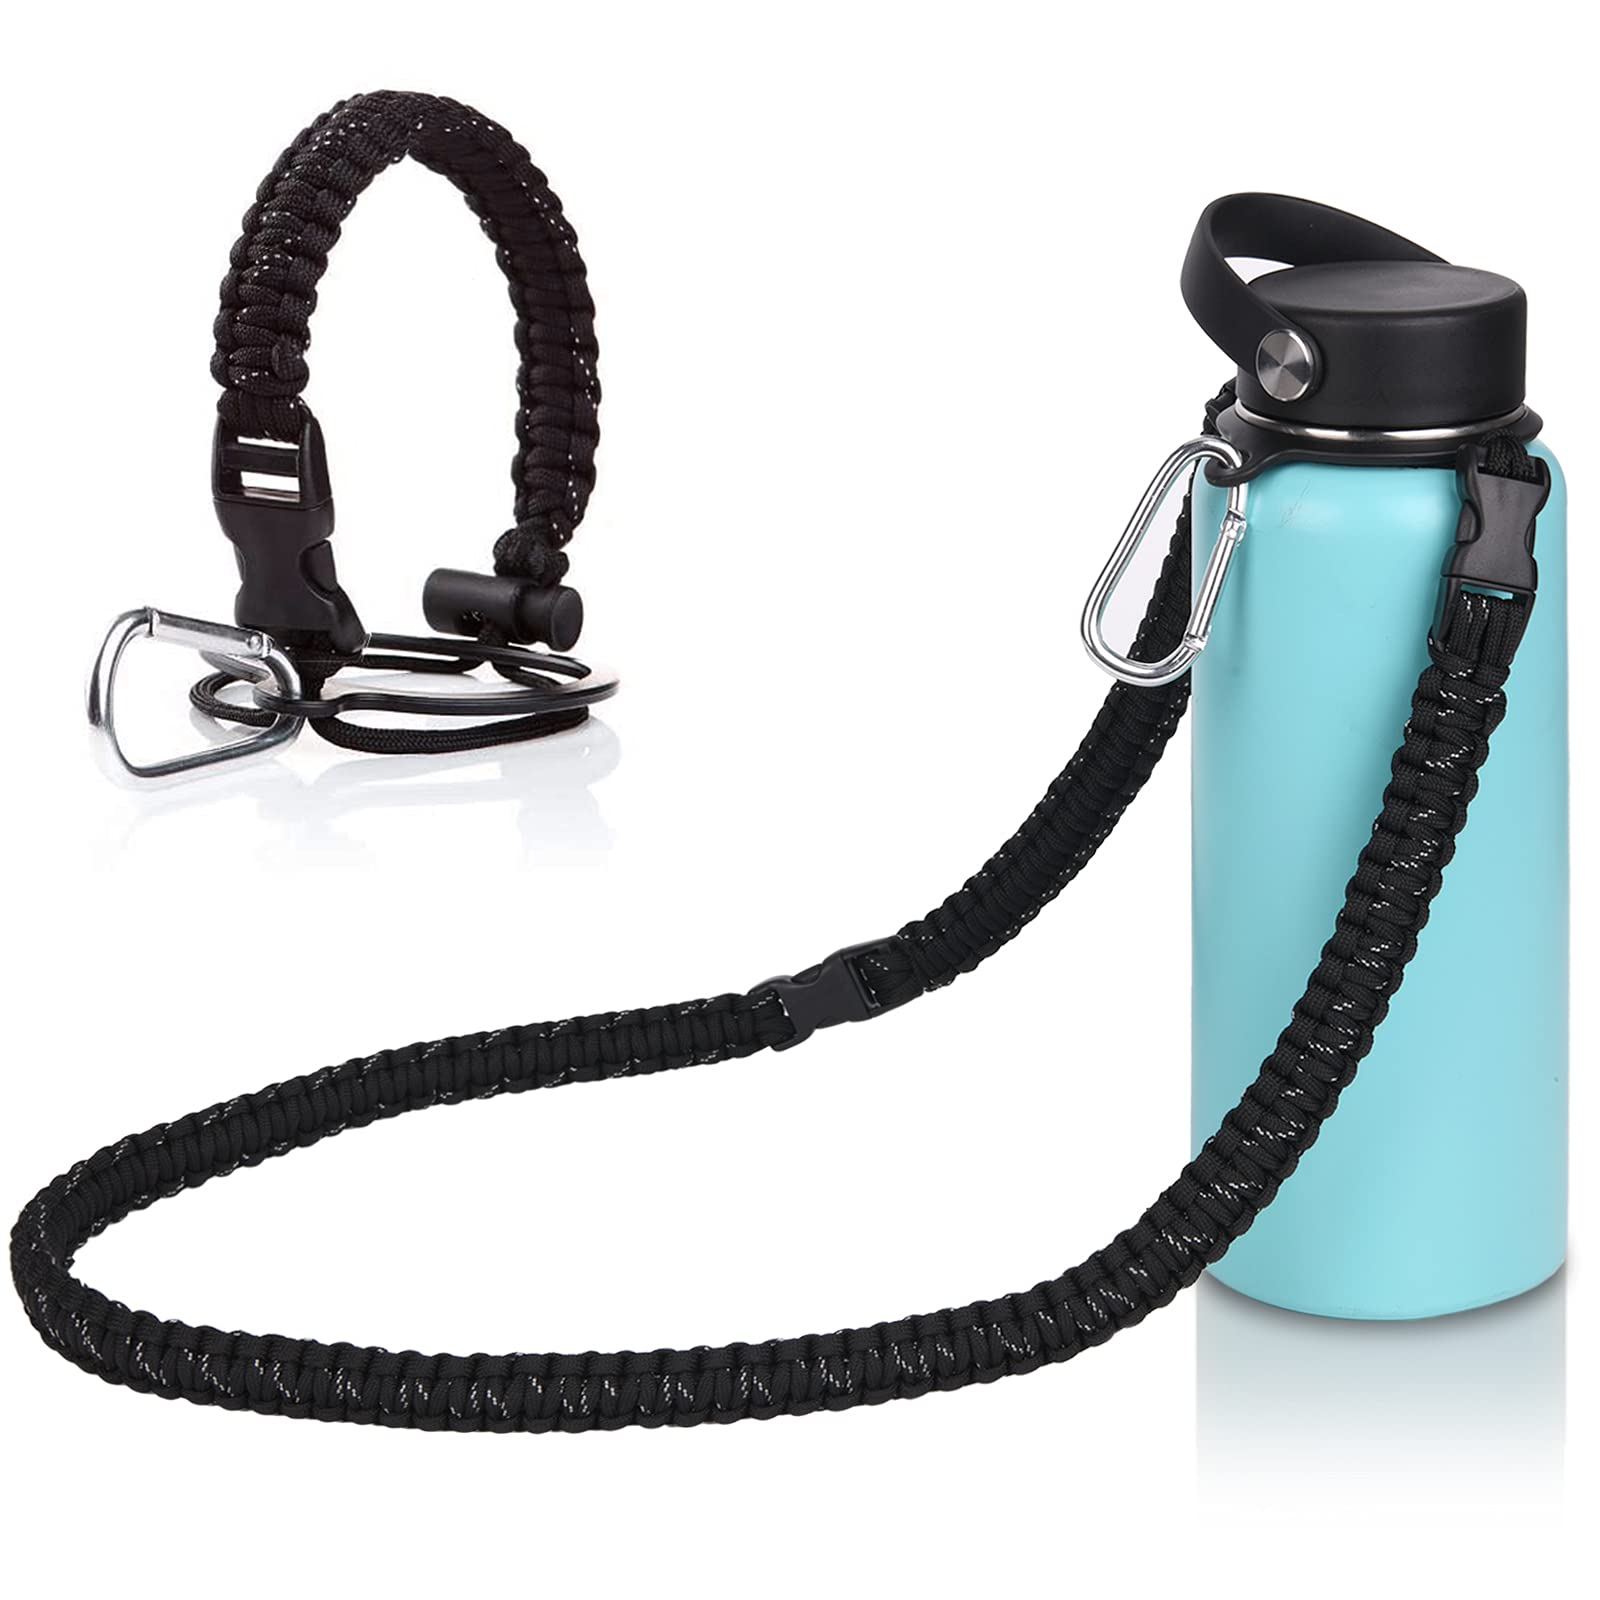  Volhoply 40 oz Insulated Water Bottles Paracord Handle